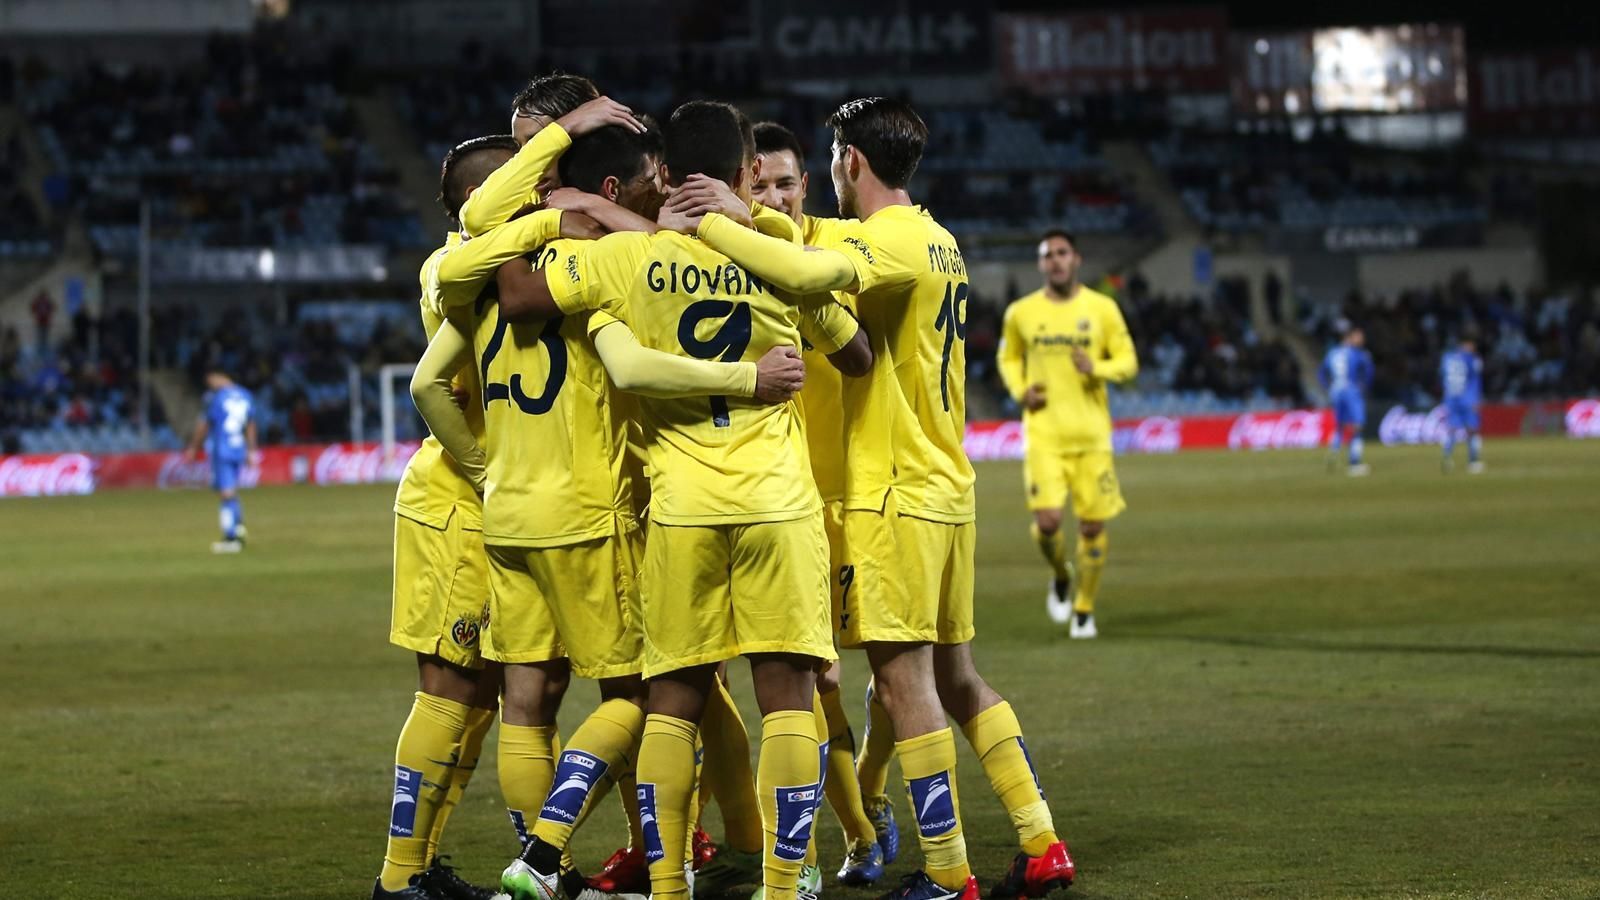 Yellow Submarine finishes in the spots of the Champions League, beating 10-men Betis